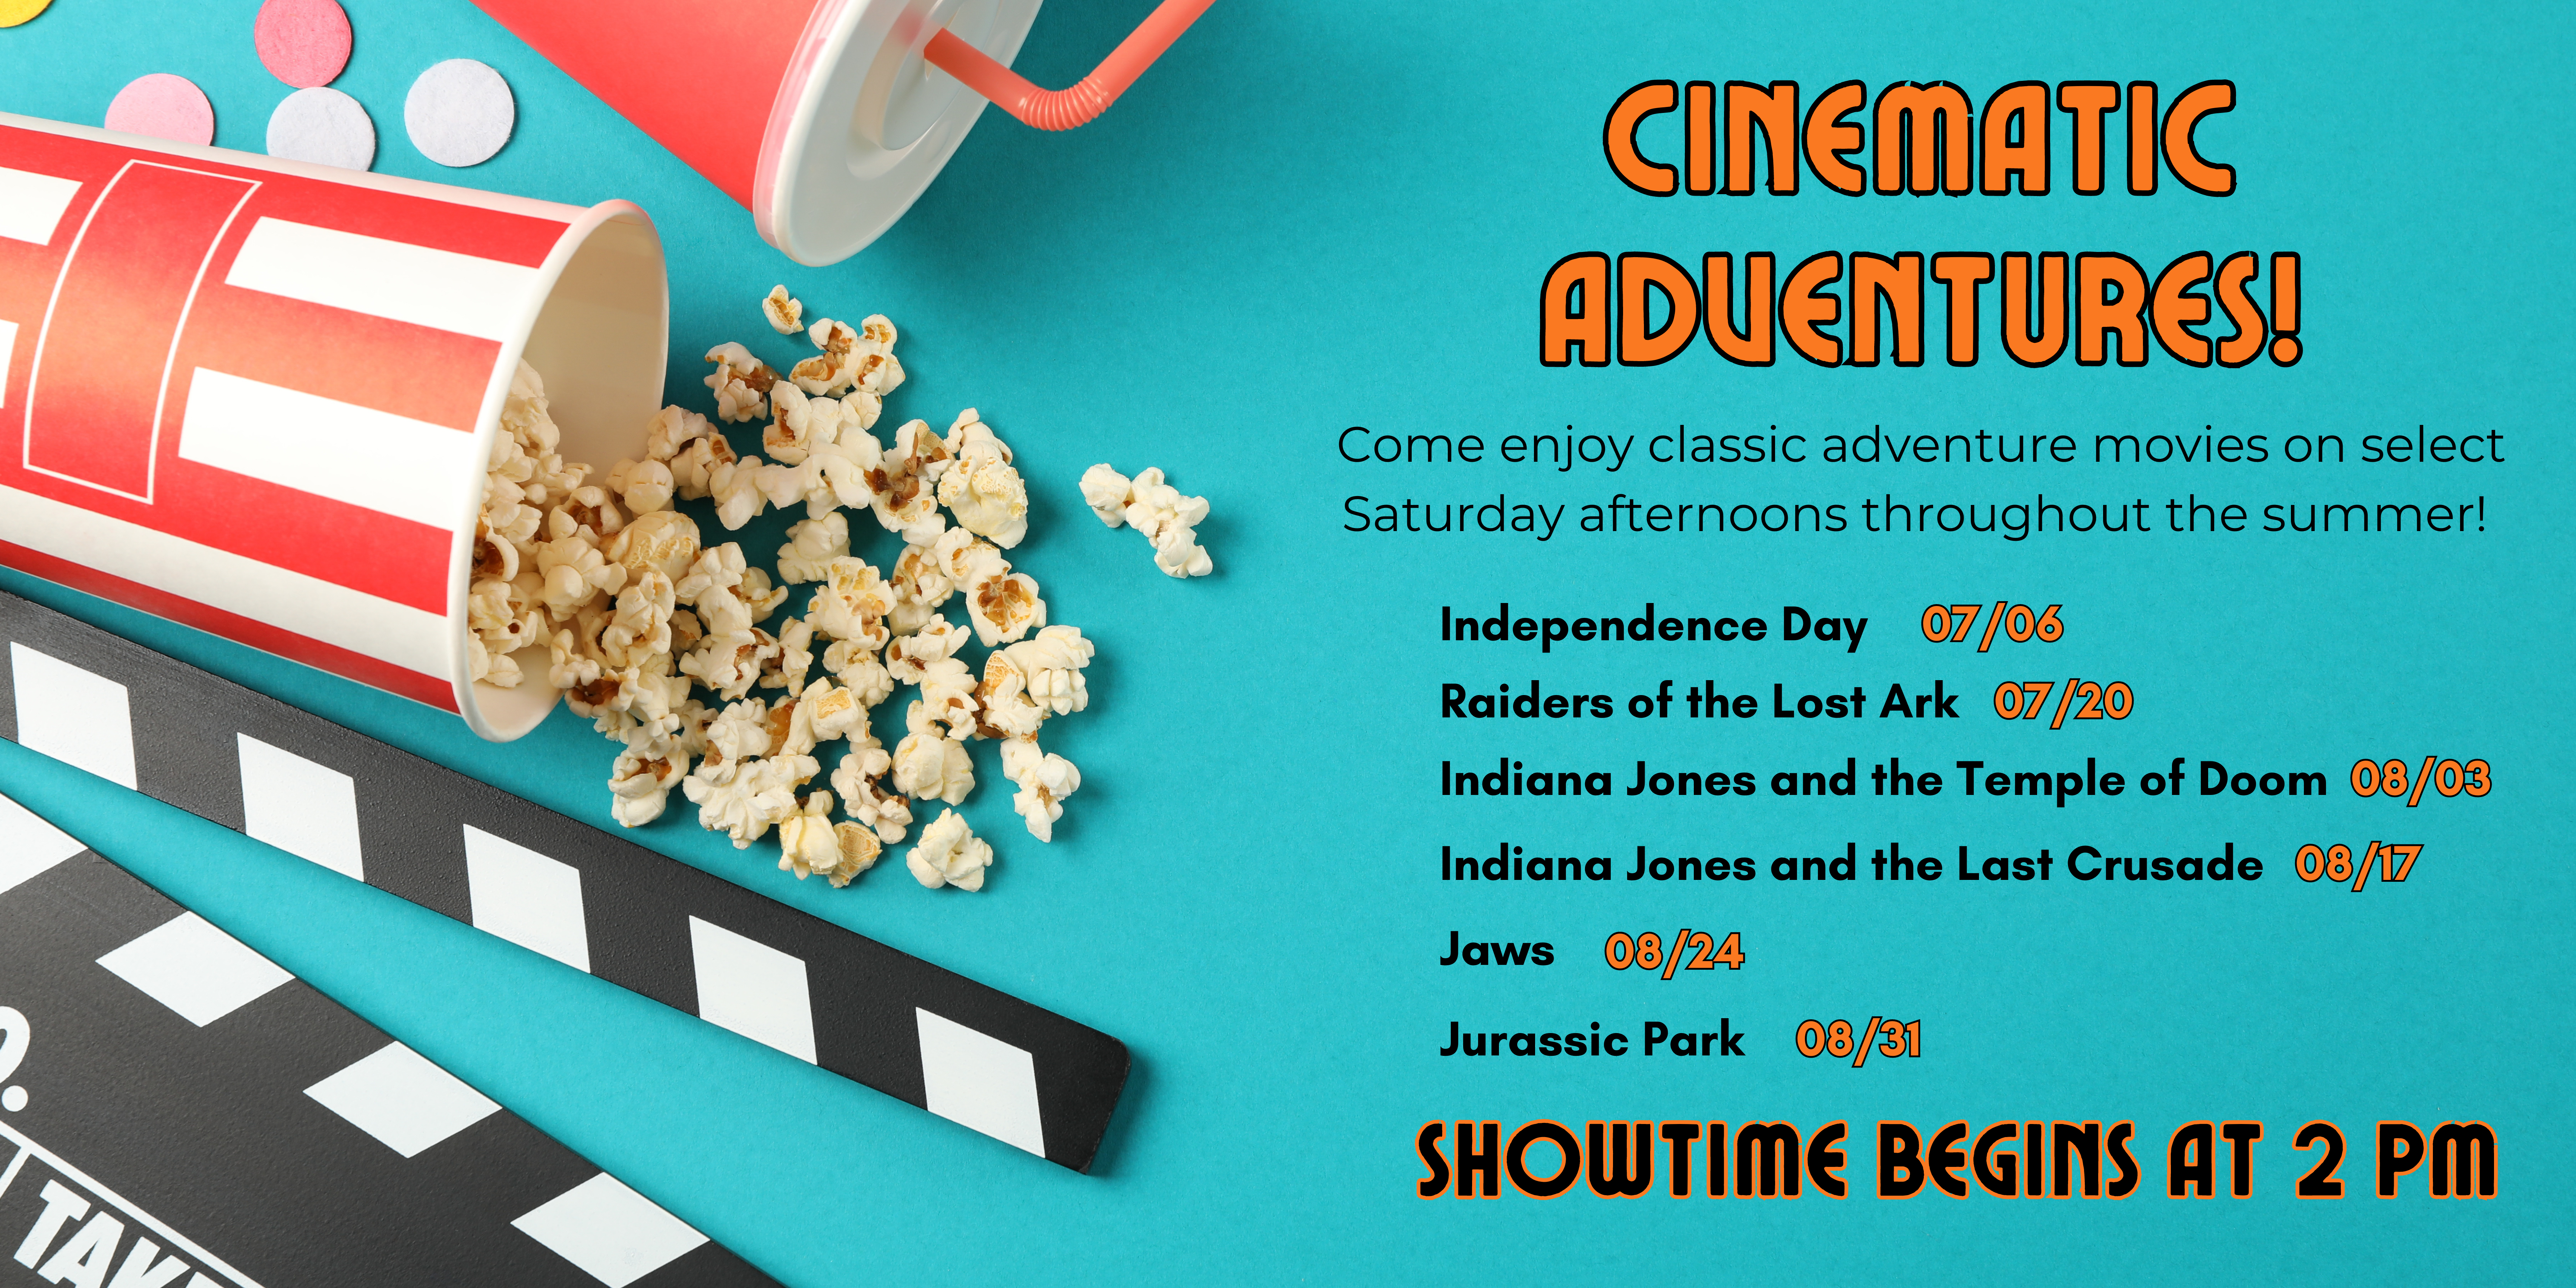 A colorful image with popcorn, a film slate, and a soda cup, with text promoting the weekly Saturday adventure films to be shown at the library.